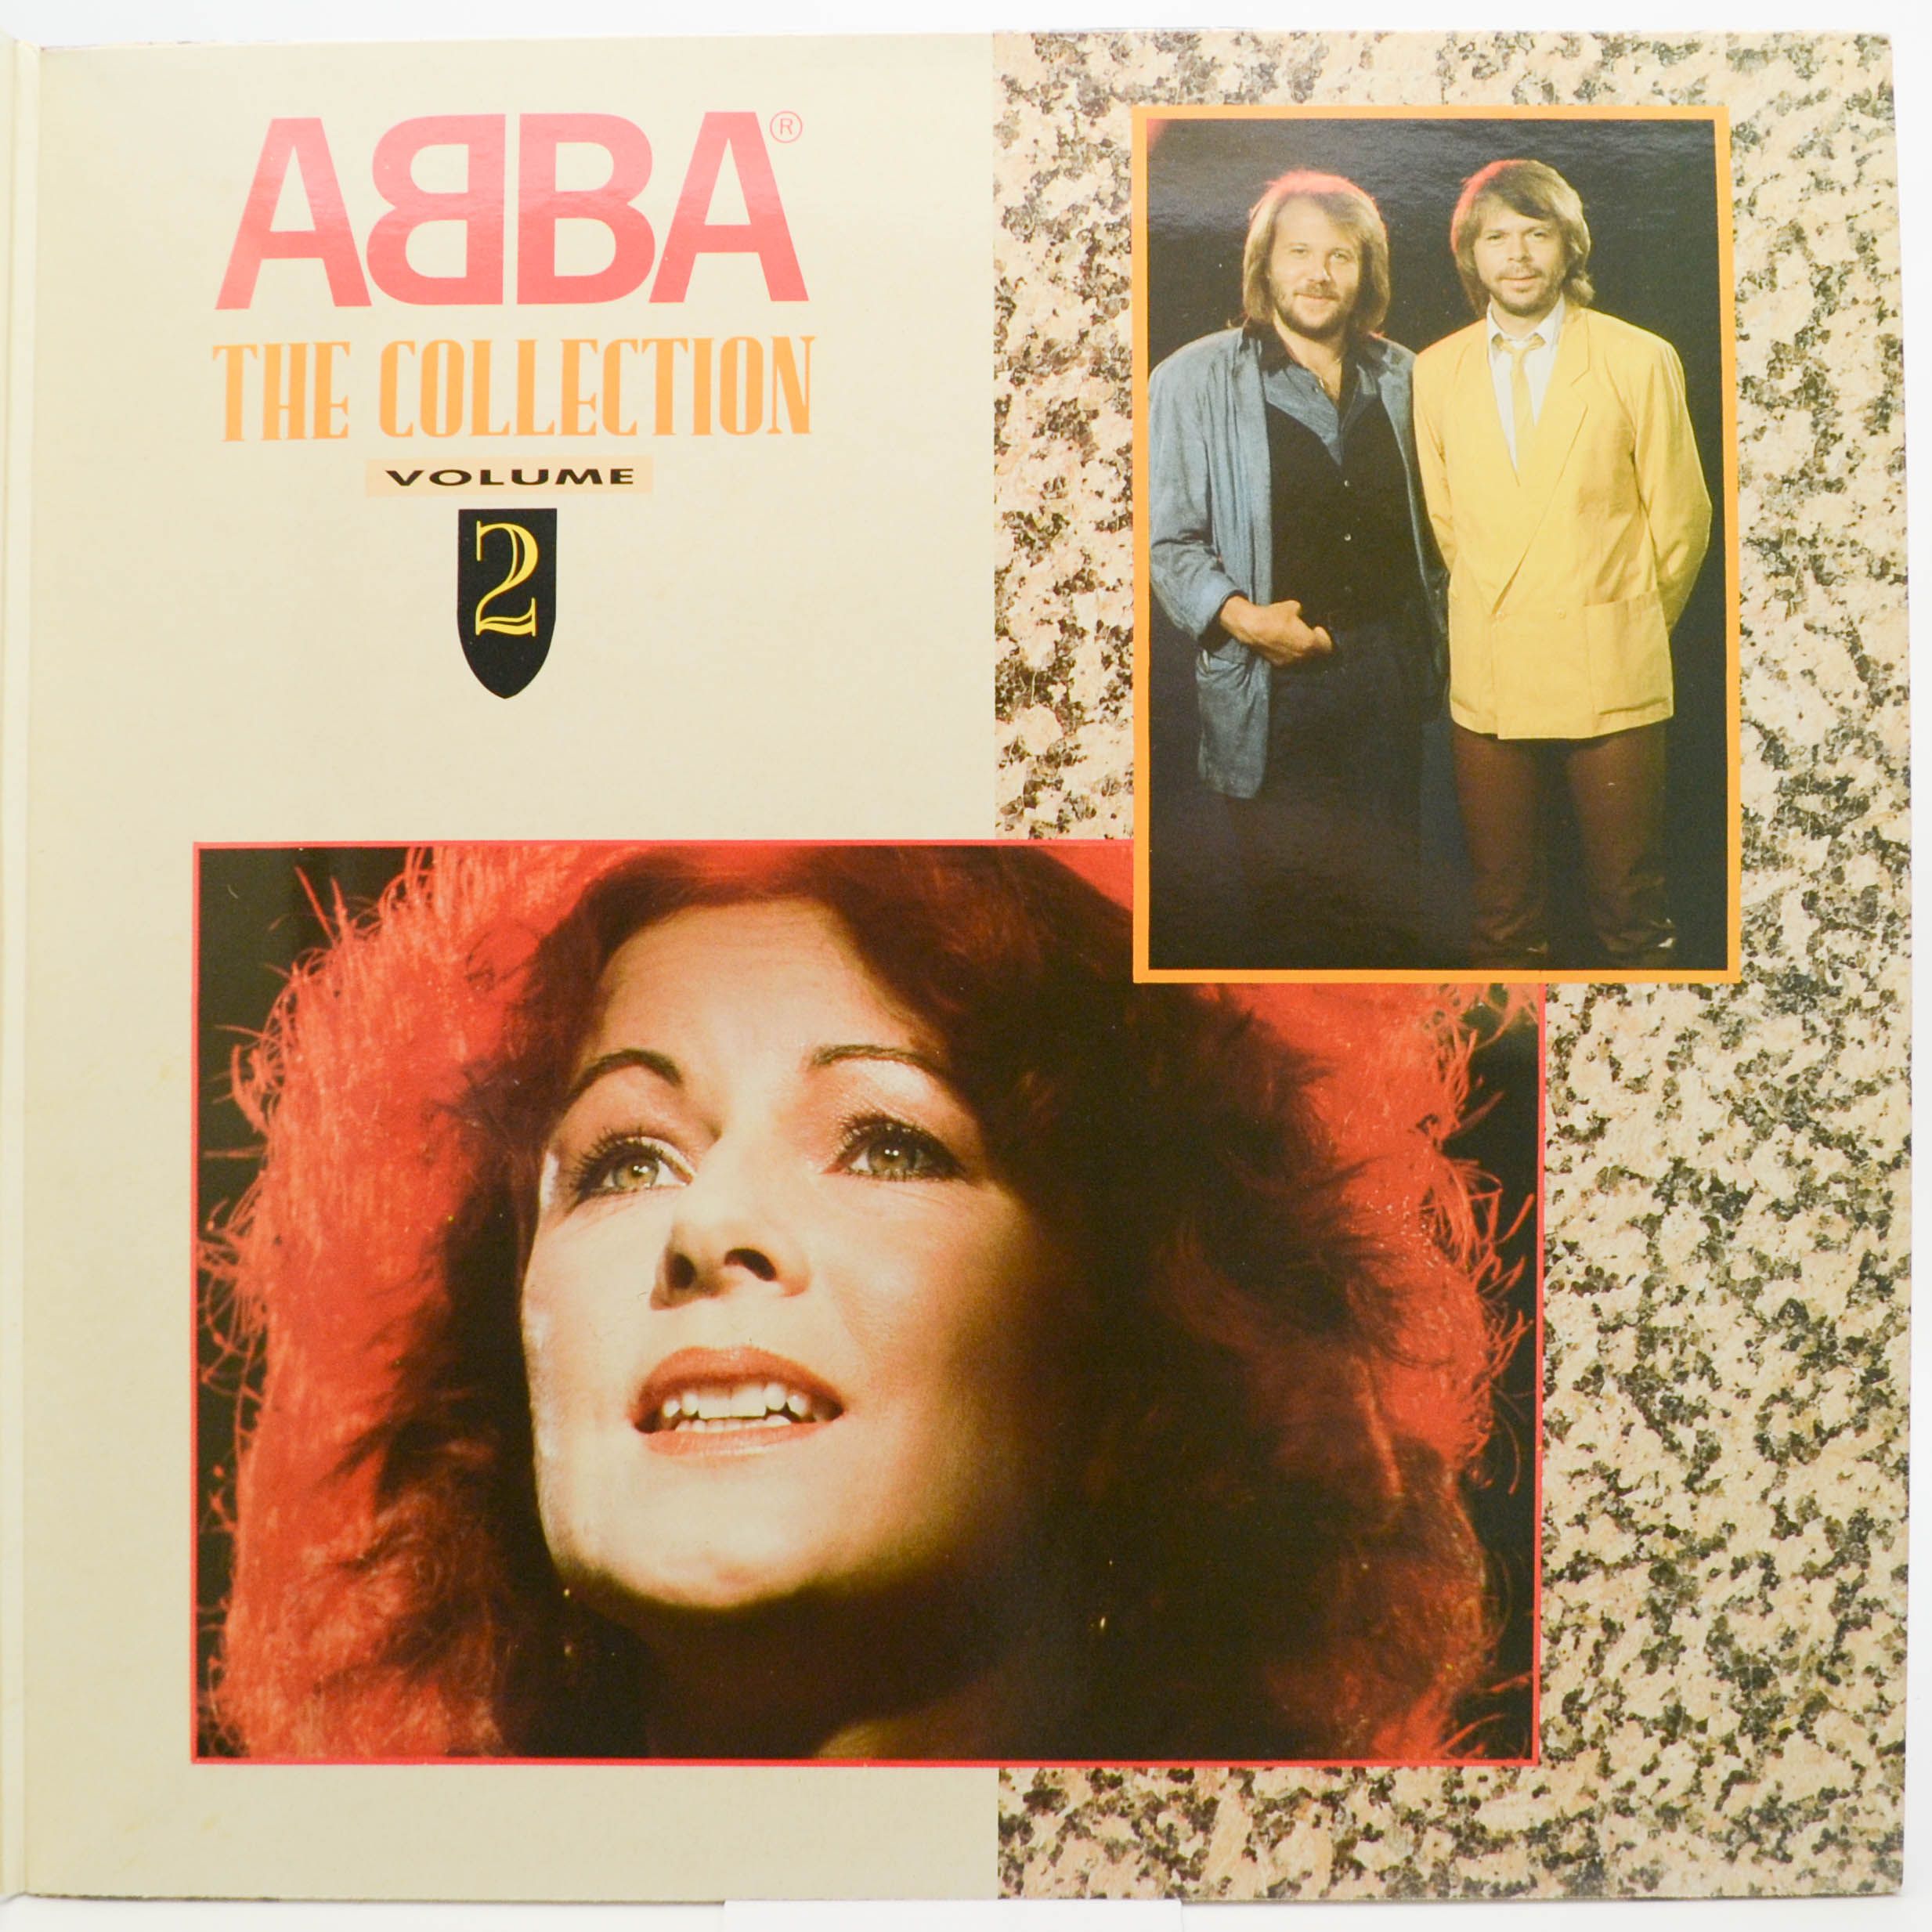 ABBA — The Collection Volume 2 (2LP, UK), 1988